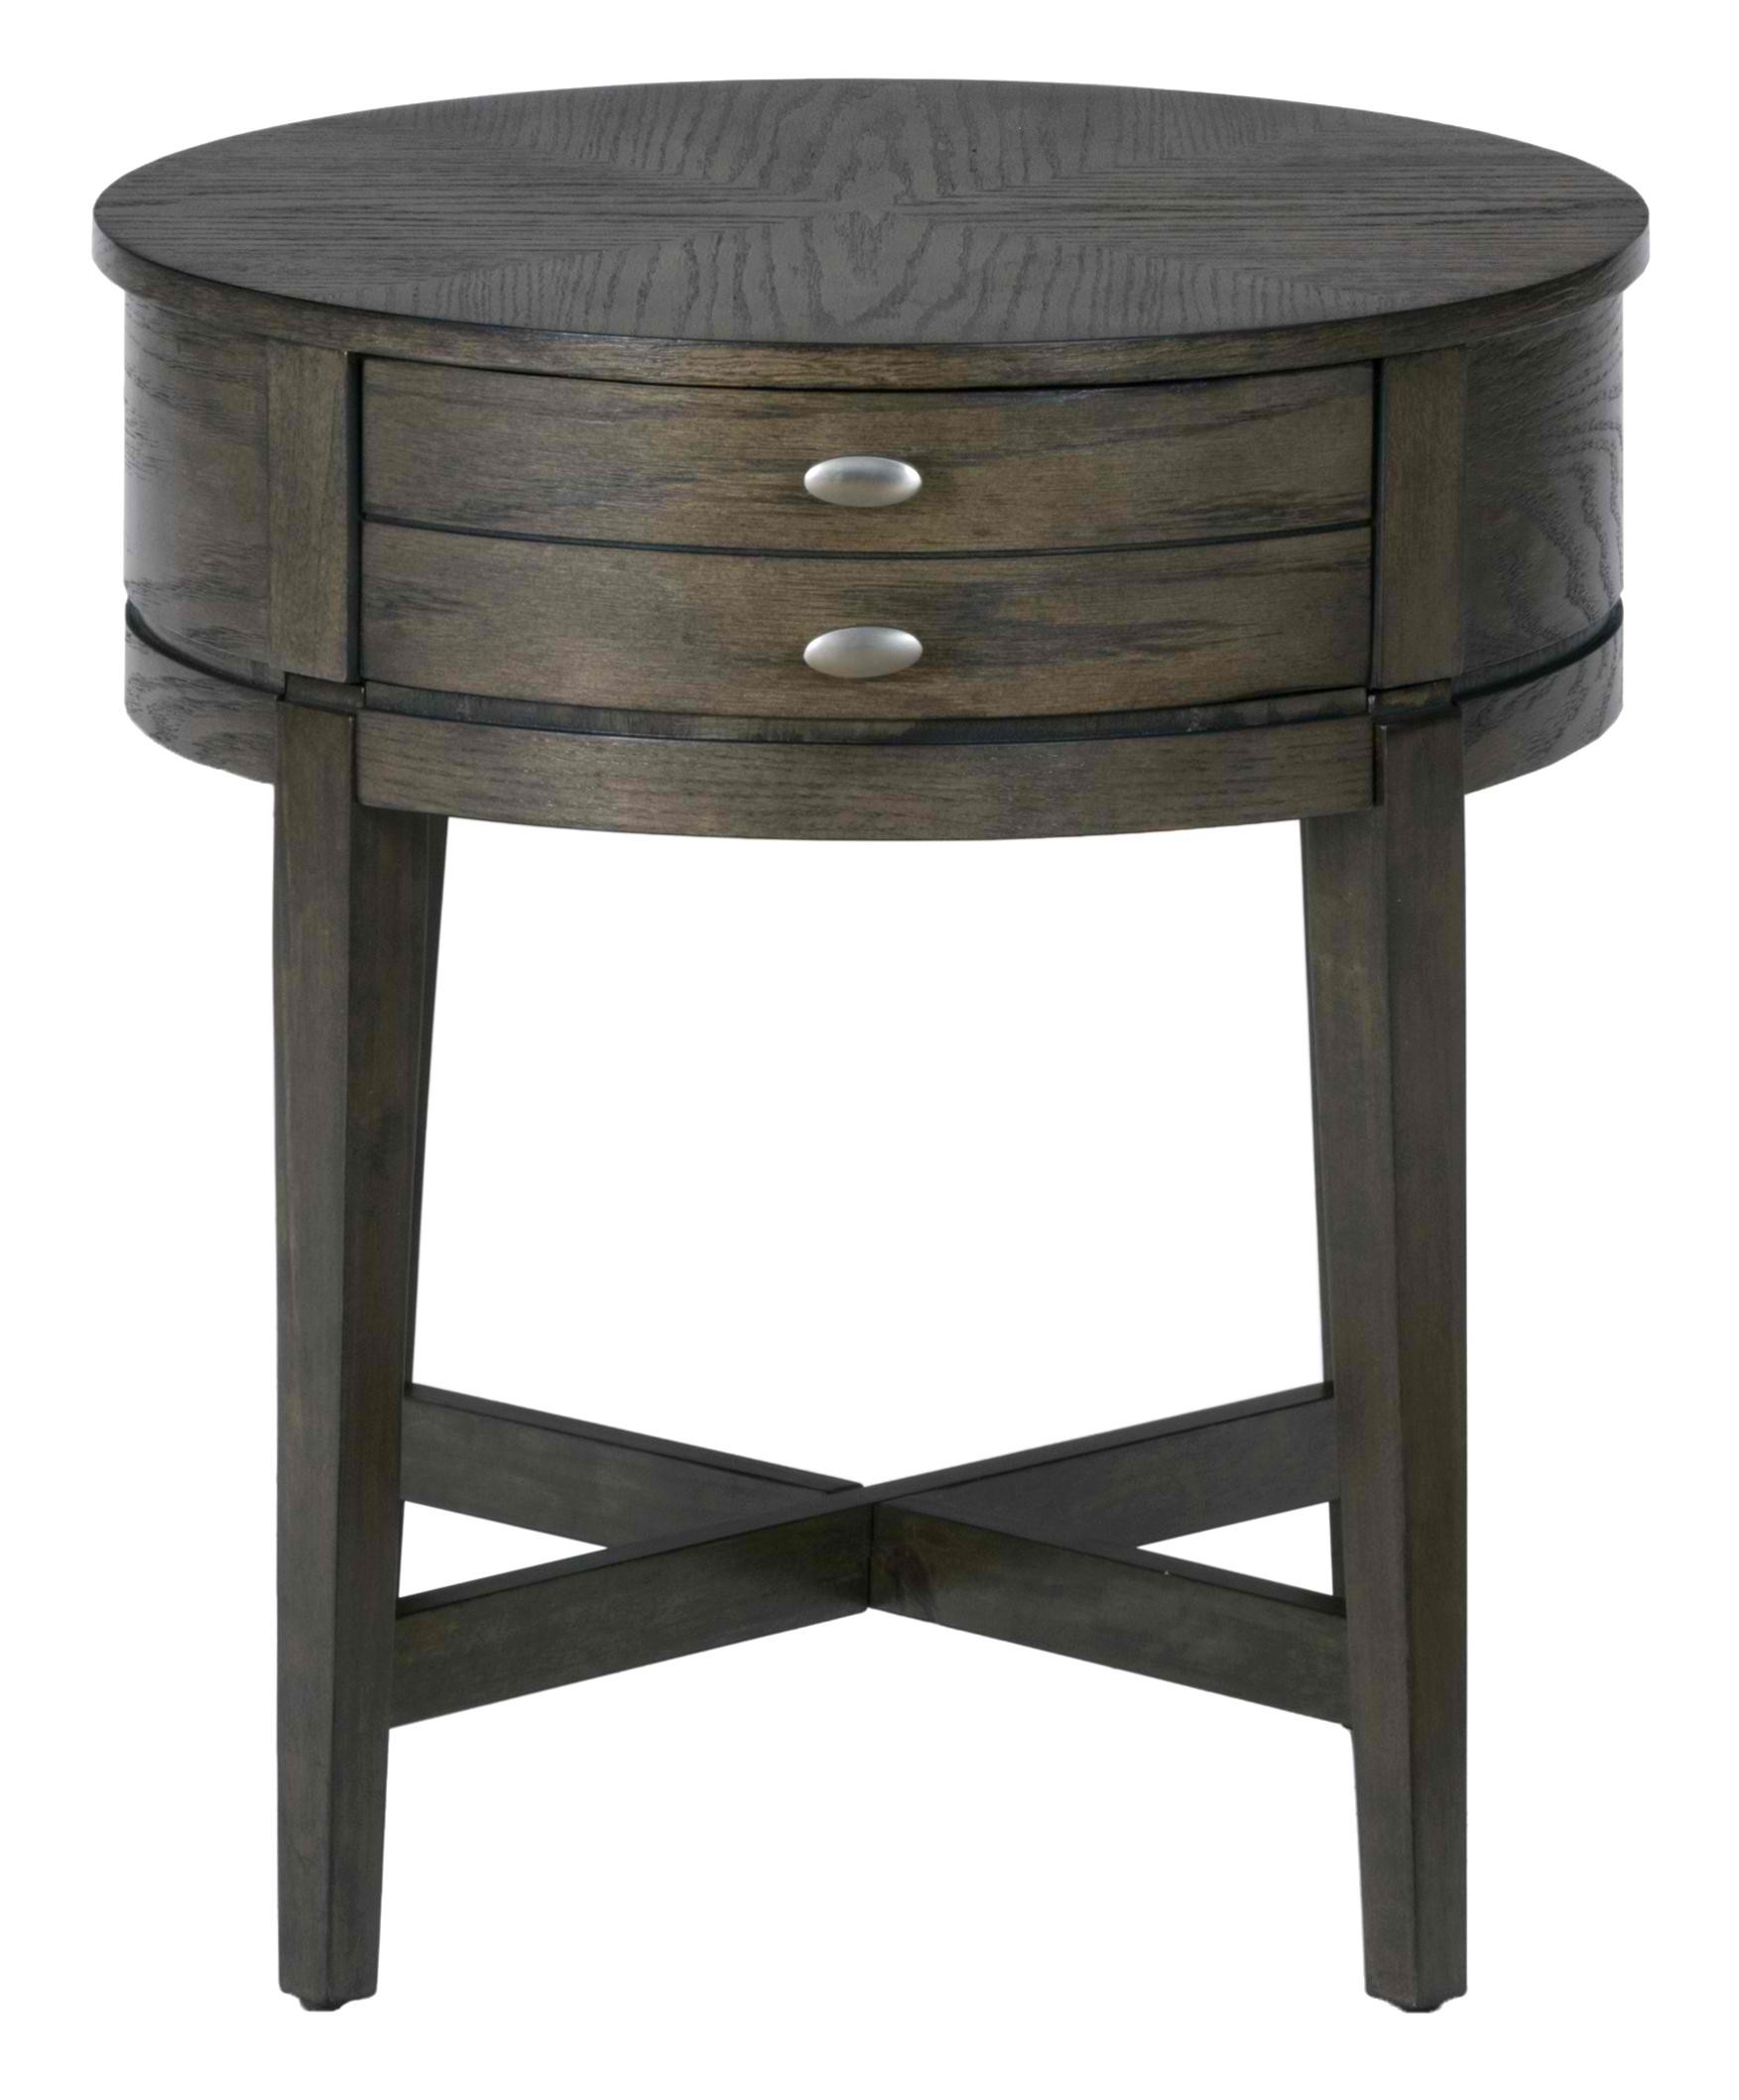 mercer accent table vintage oak best end tables bronze jofran miniatures antique gray round with ikea play outdoor globe light rustic coffee patio furniture clearance wooden stool